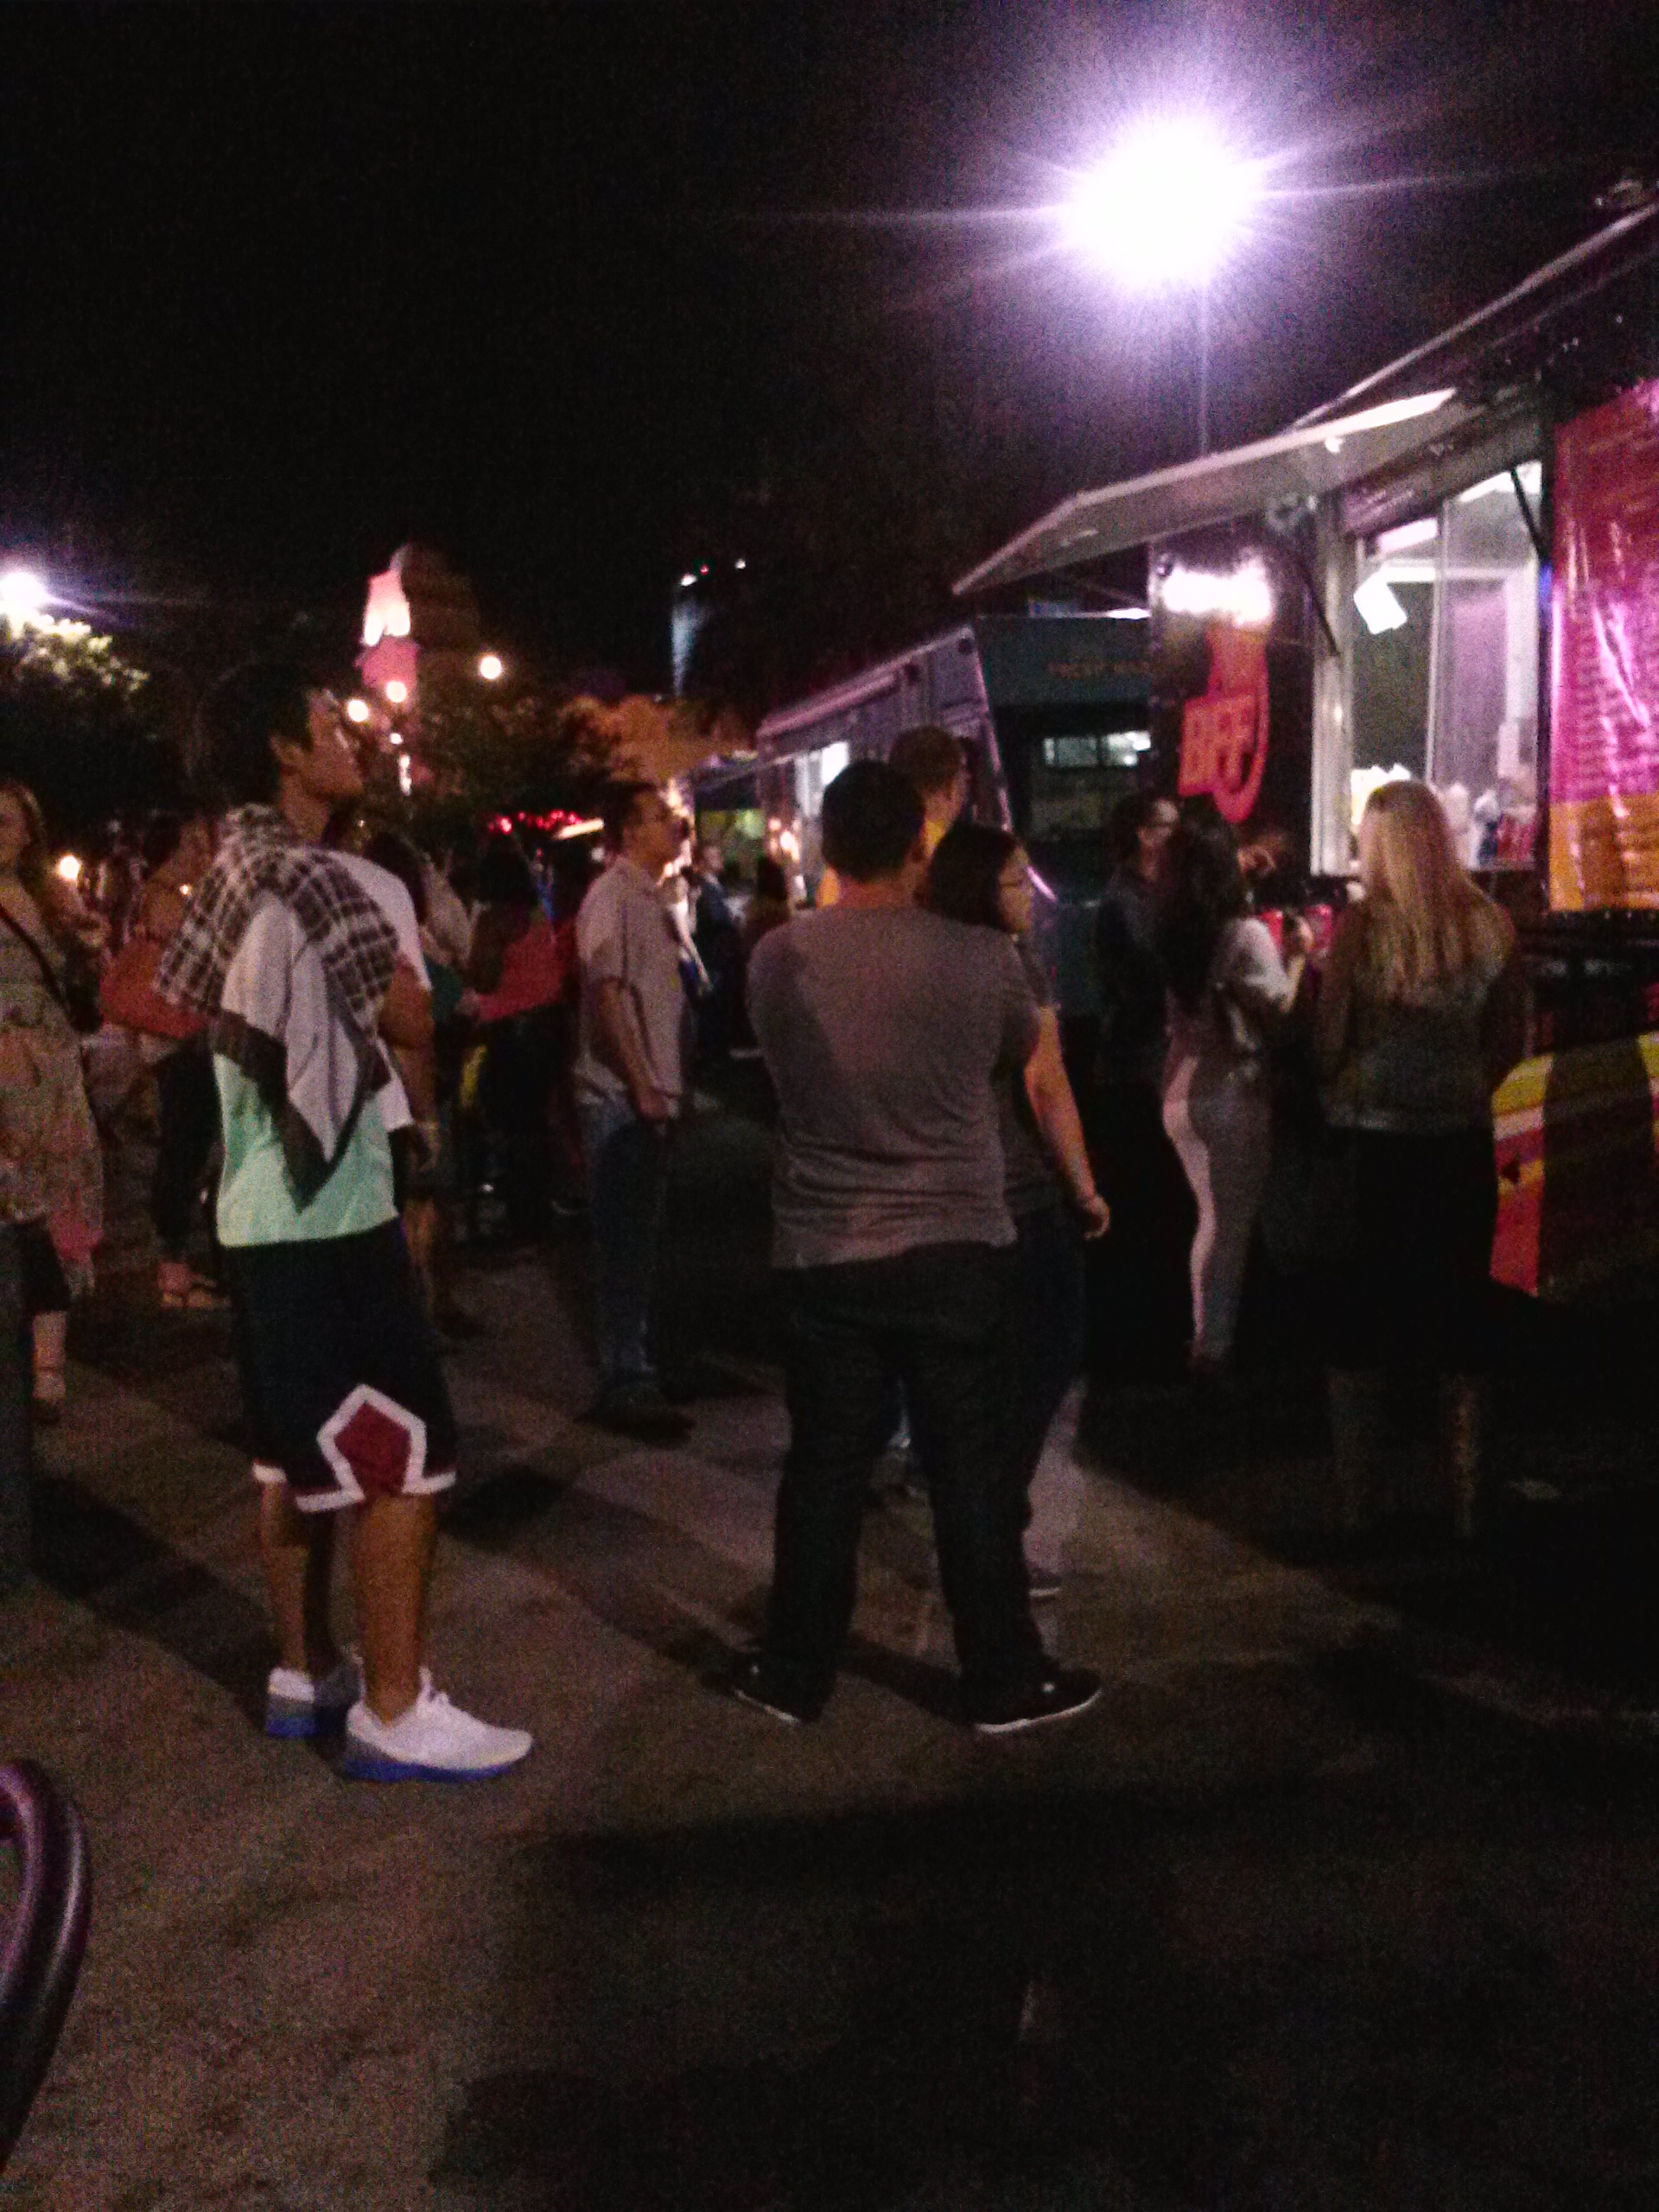 The line to get to a grilled cheese sandwich from Ms. Cheezious was always long compared to the other food trucks (Photo by Daniela Rodriguez).